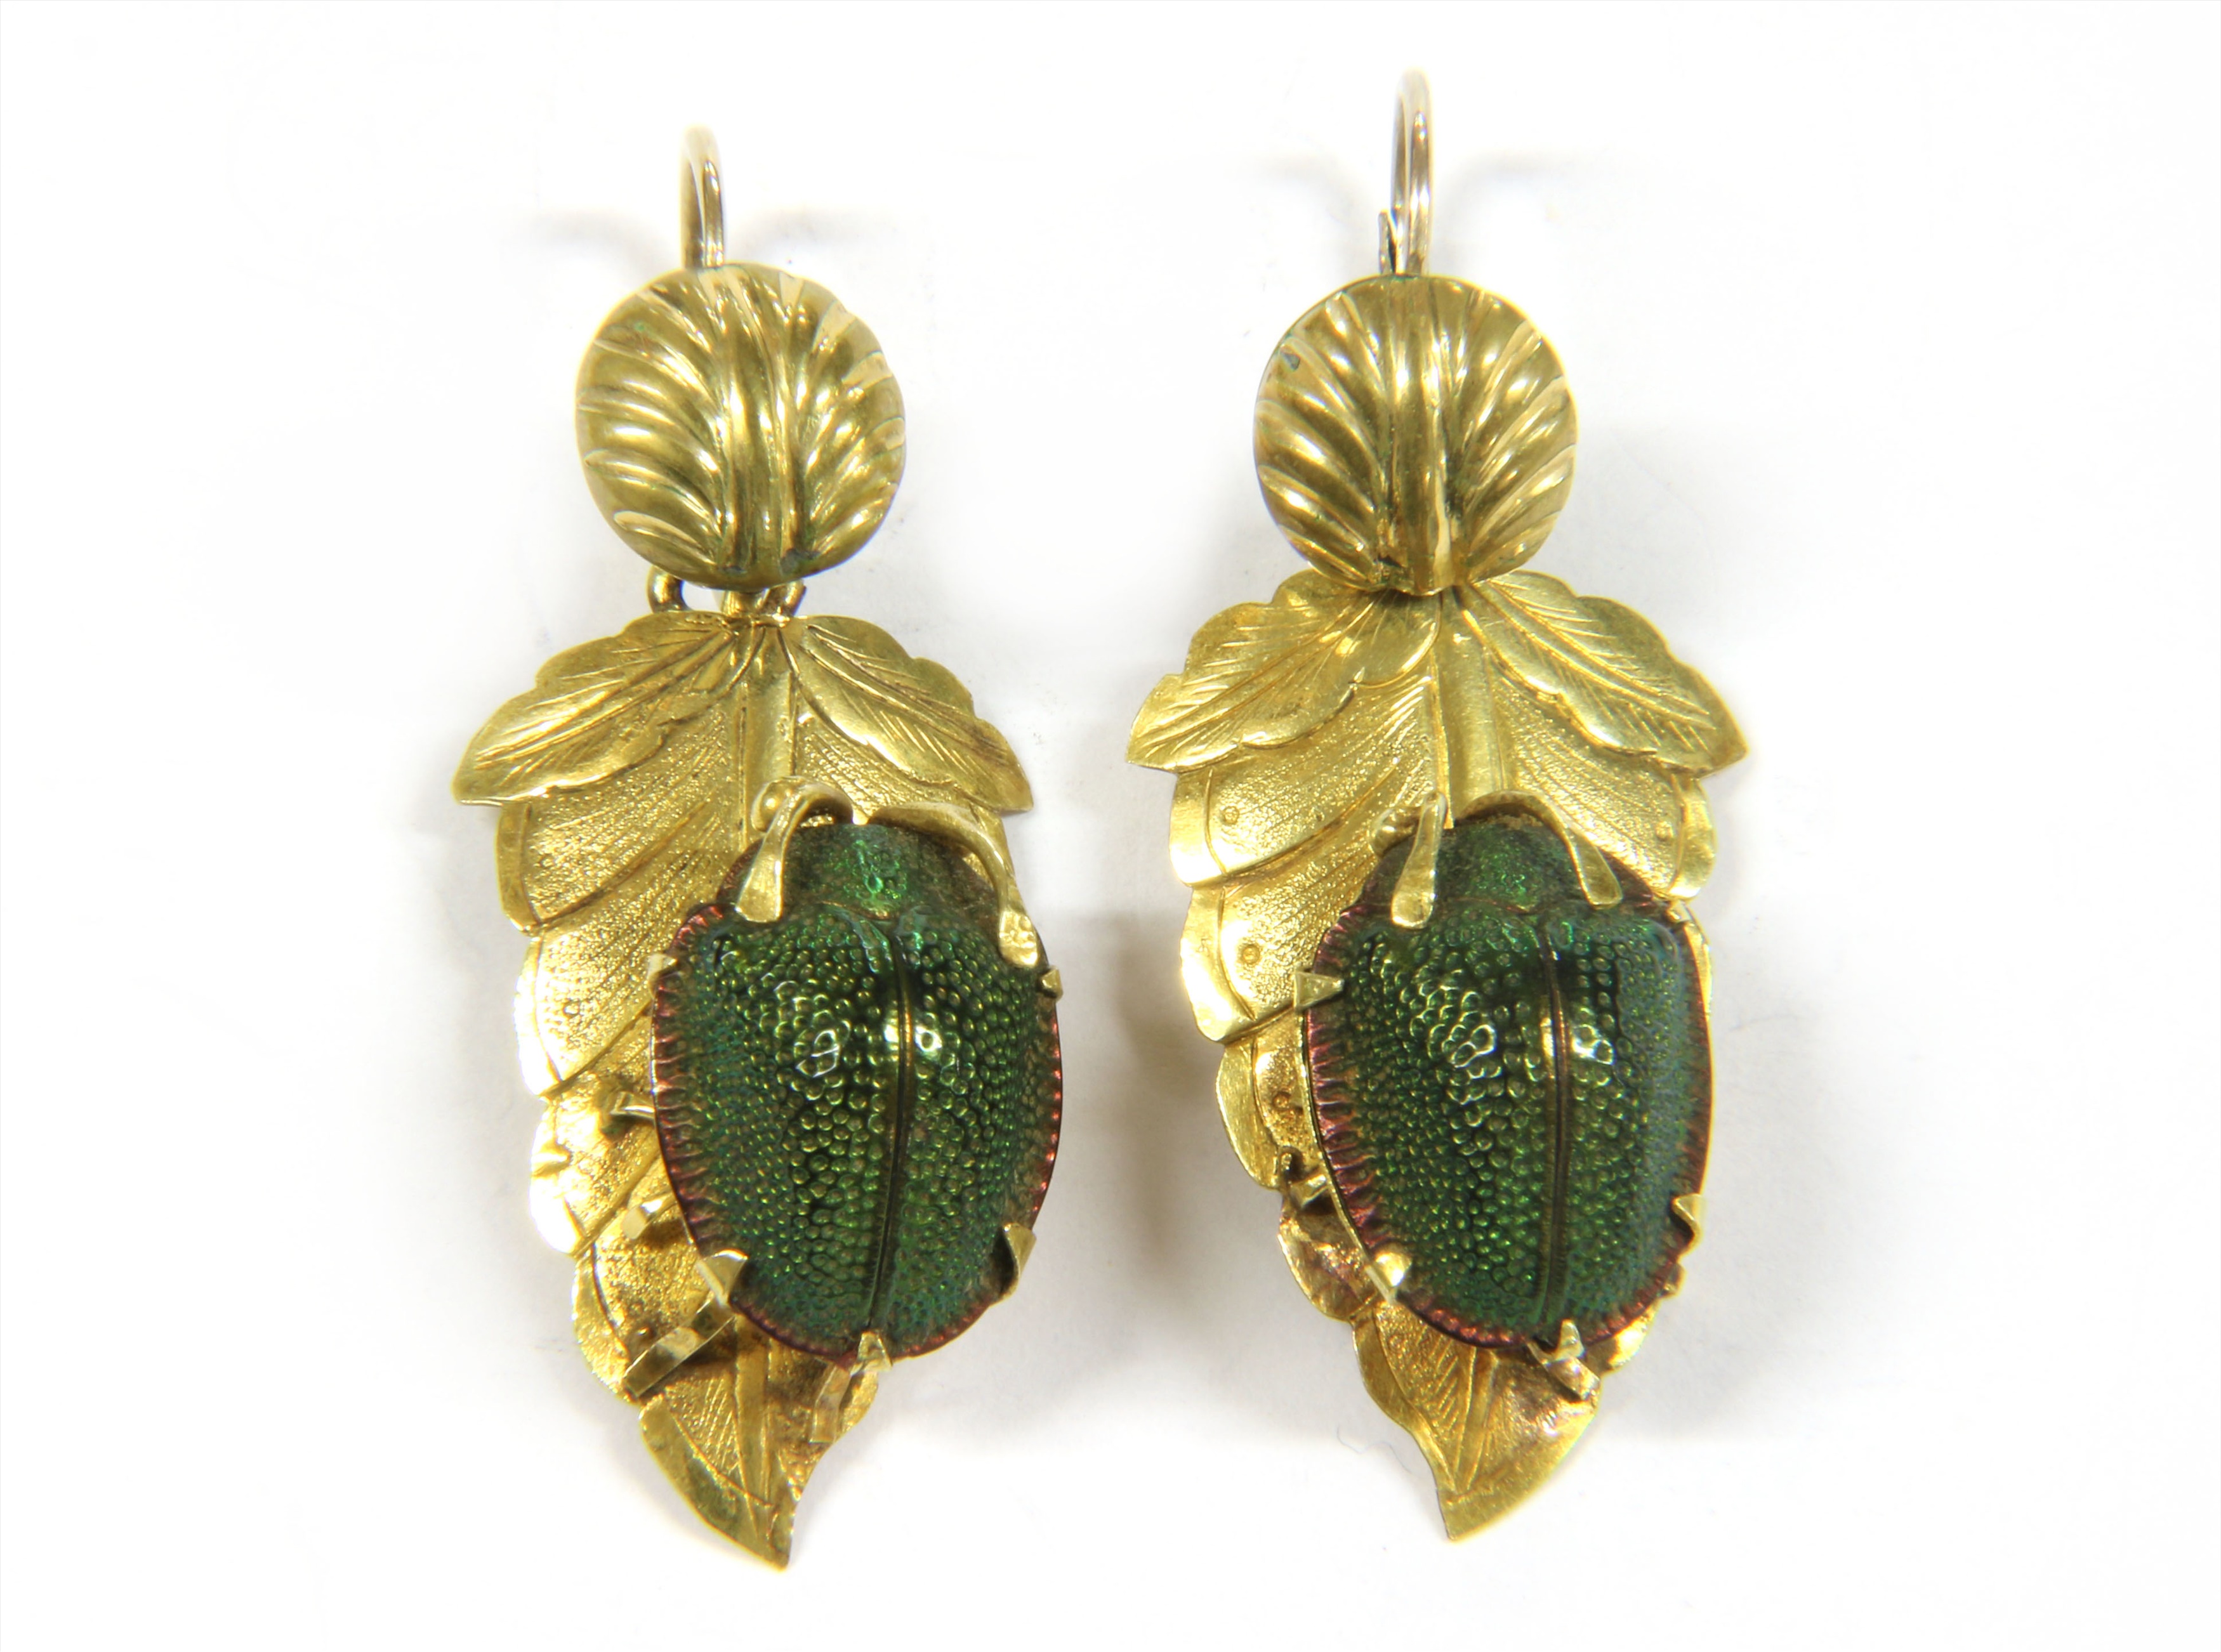 A pair of Victorian gilt metal earrings set with real scarabs (the actual beetles preserved) Upcoming in Jewellery, Silver & Luxury Goods Sale, 8th April 2020, together with a 20thcentury faience ring and a section of scarab beetle bracelet Estimate £100-200